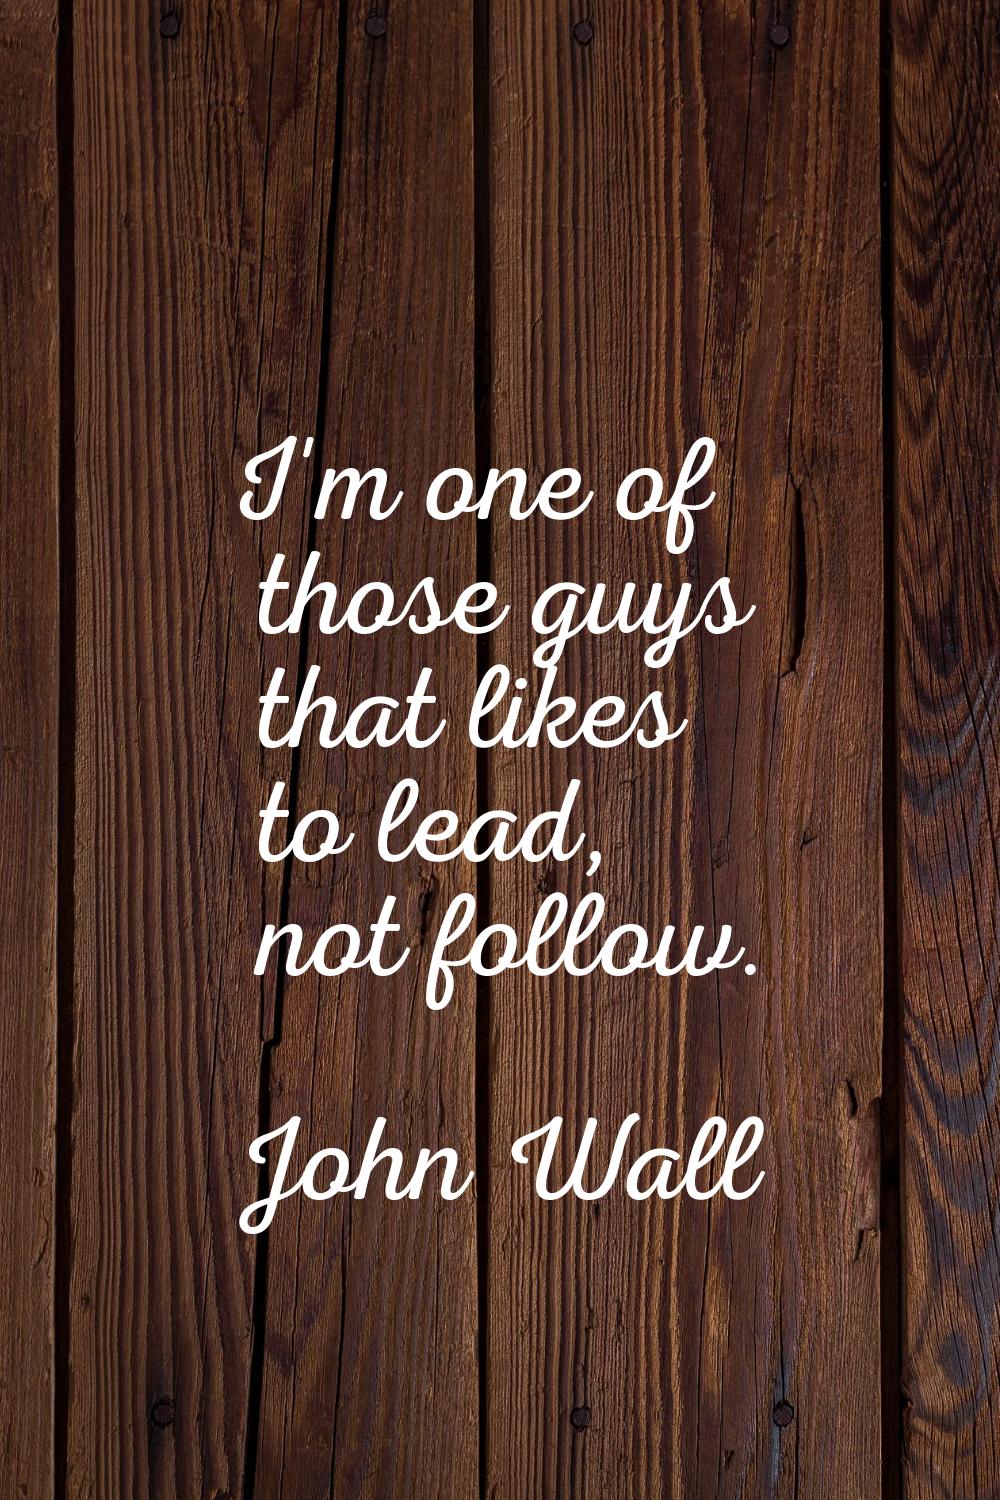 I'm one of those guys that likes to lead, not follow.